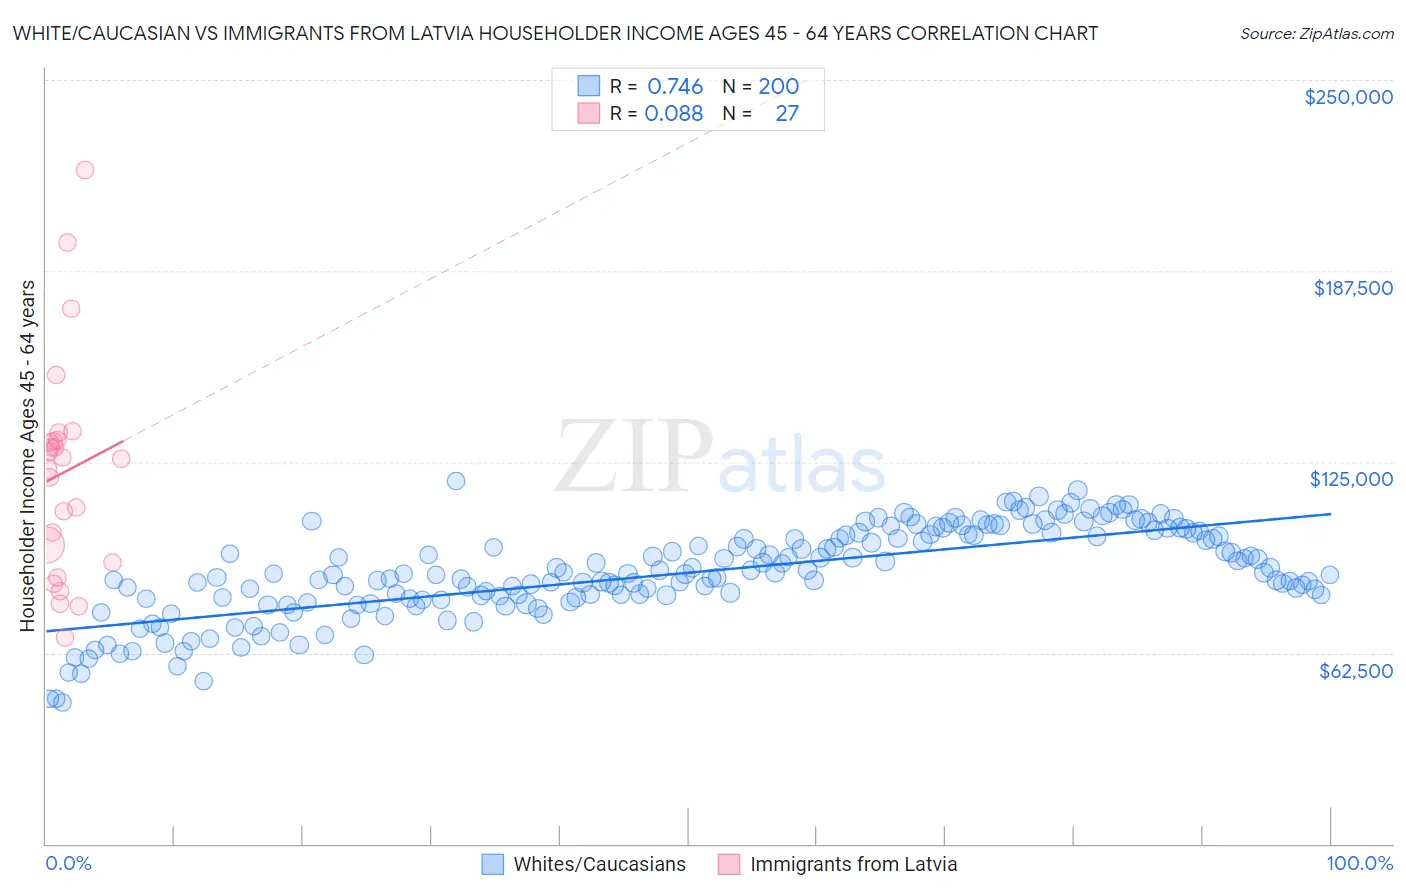 White/Caucasian vs Immigrants from Latvia Householder Income Ages 45 - 64 years